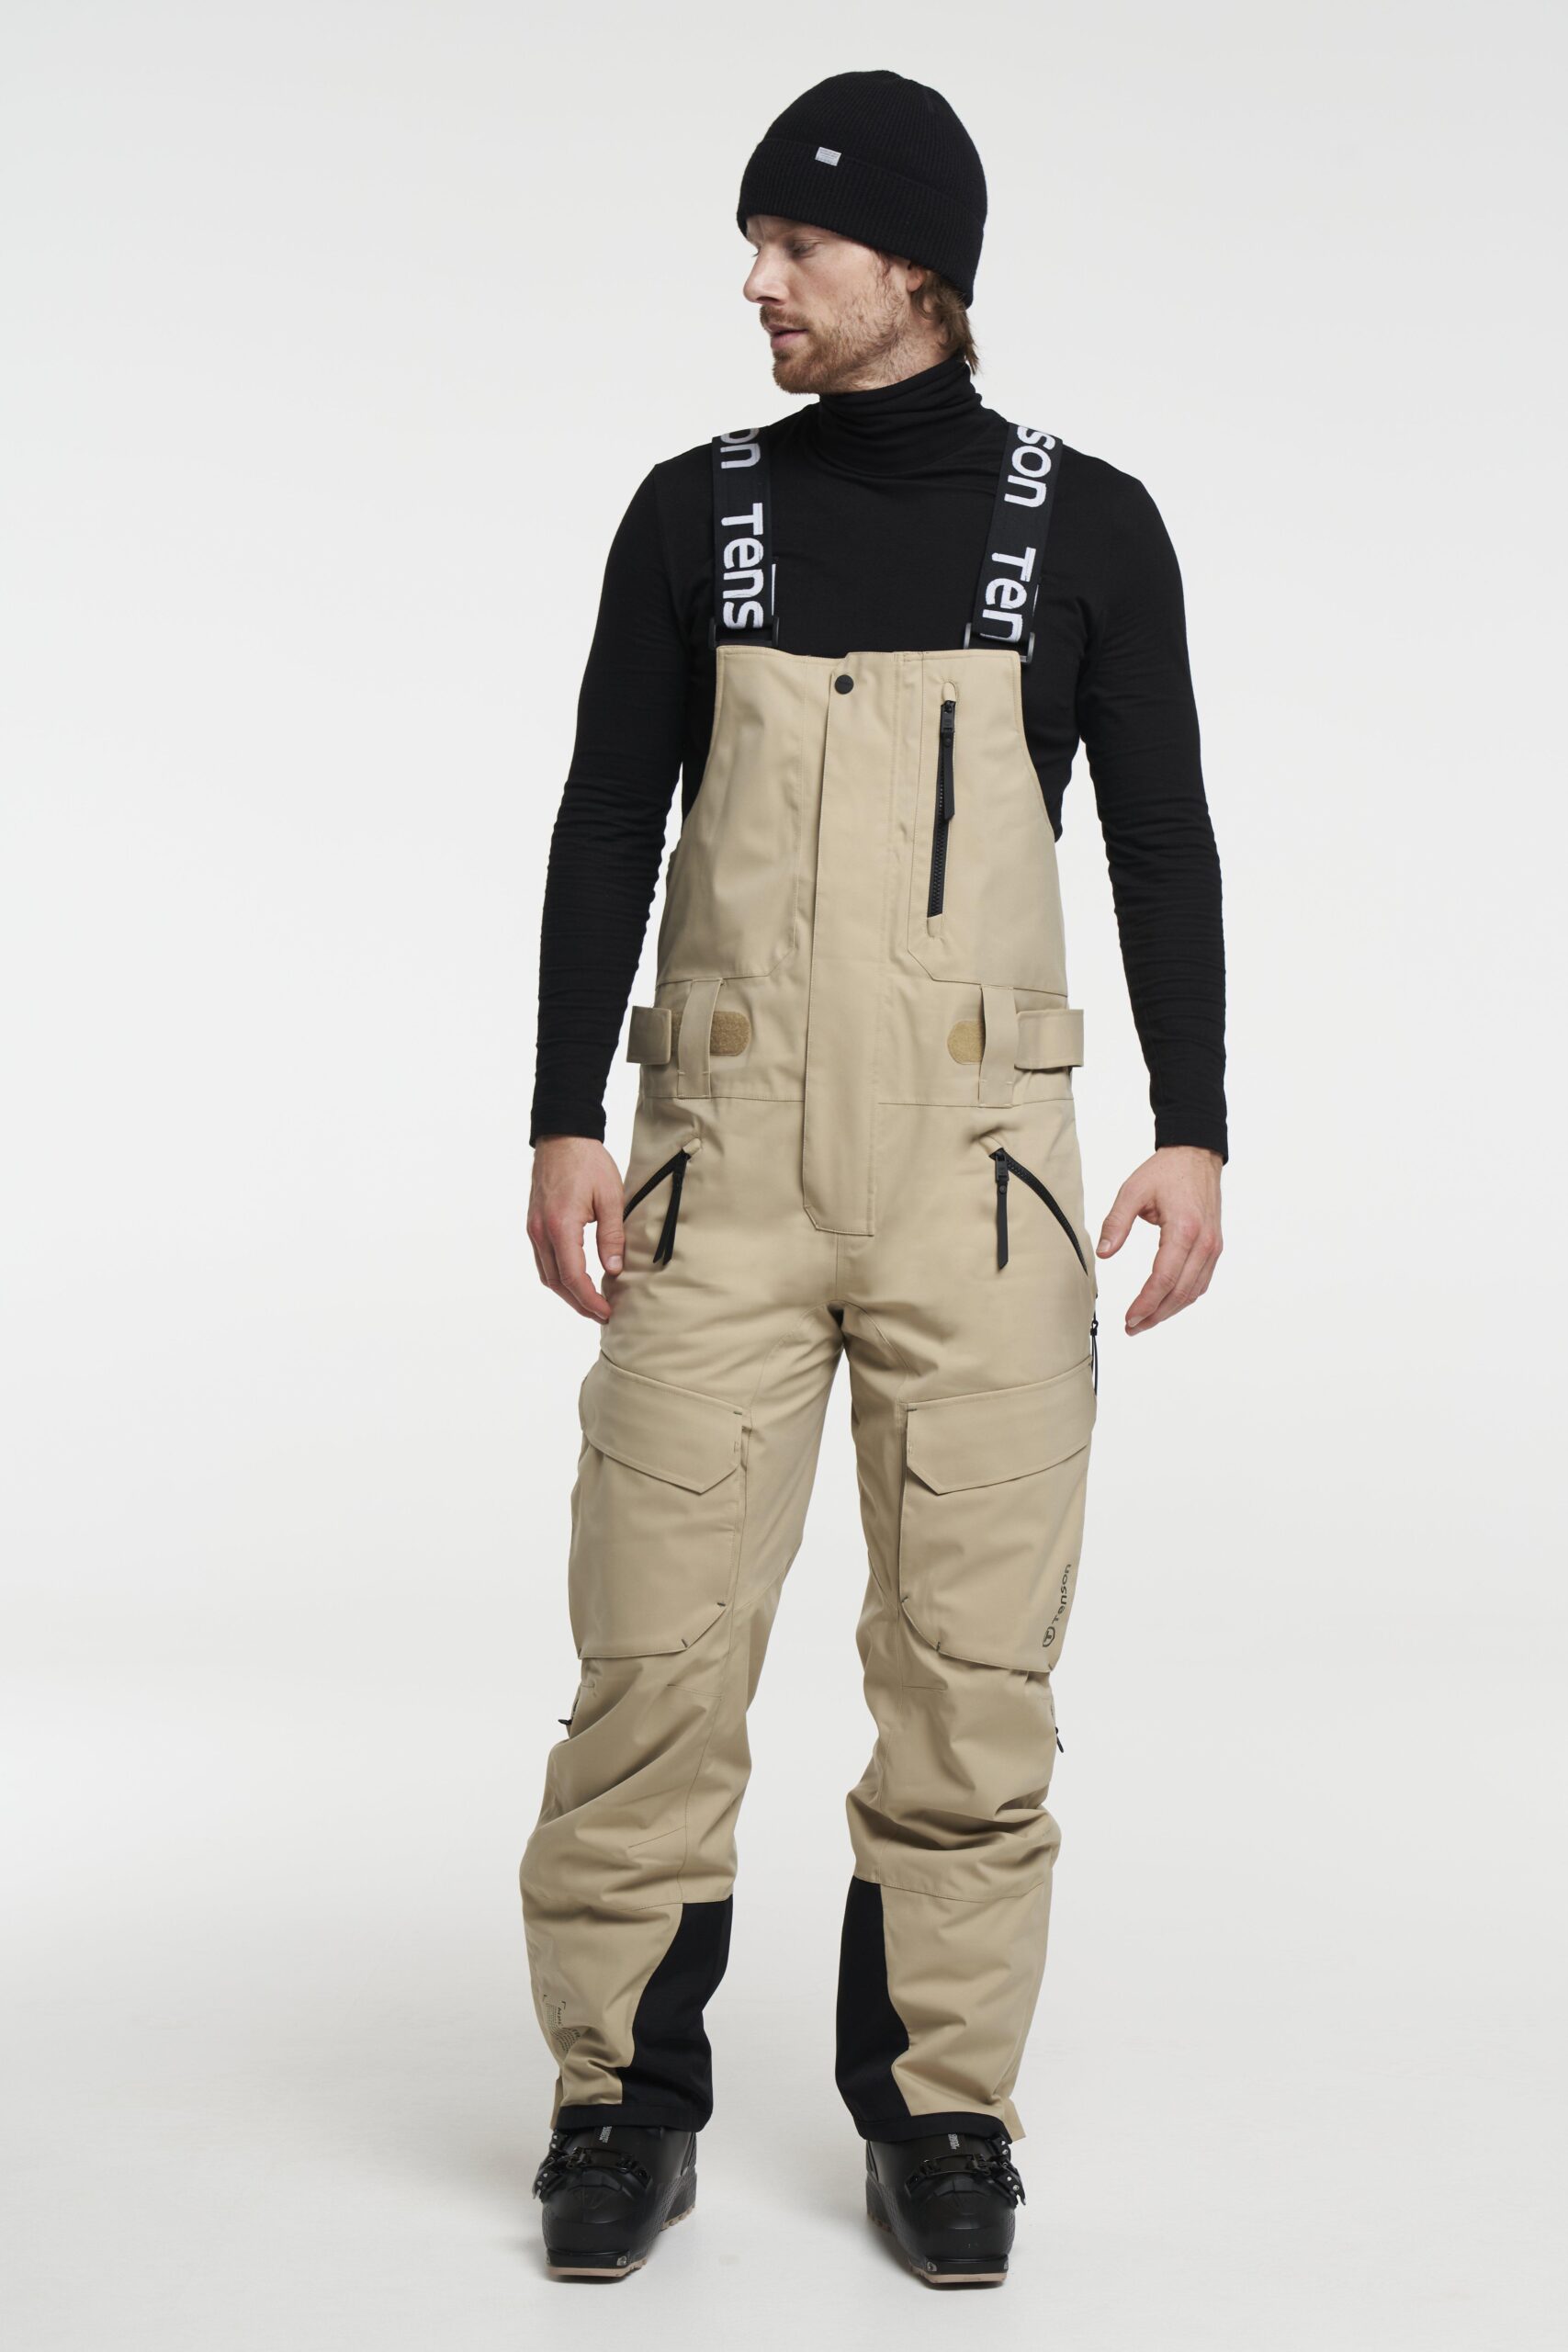 How To Properly Wear Suspenders  Buying Trouser Braces For Men  Suspender  Guide Video  YouTube